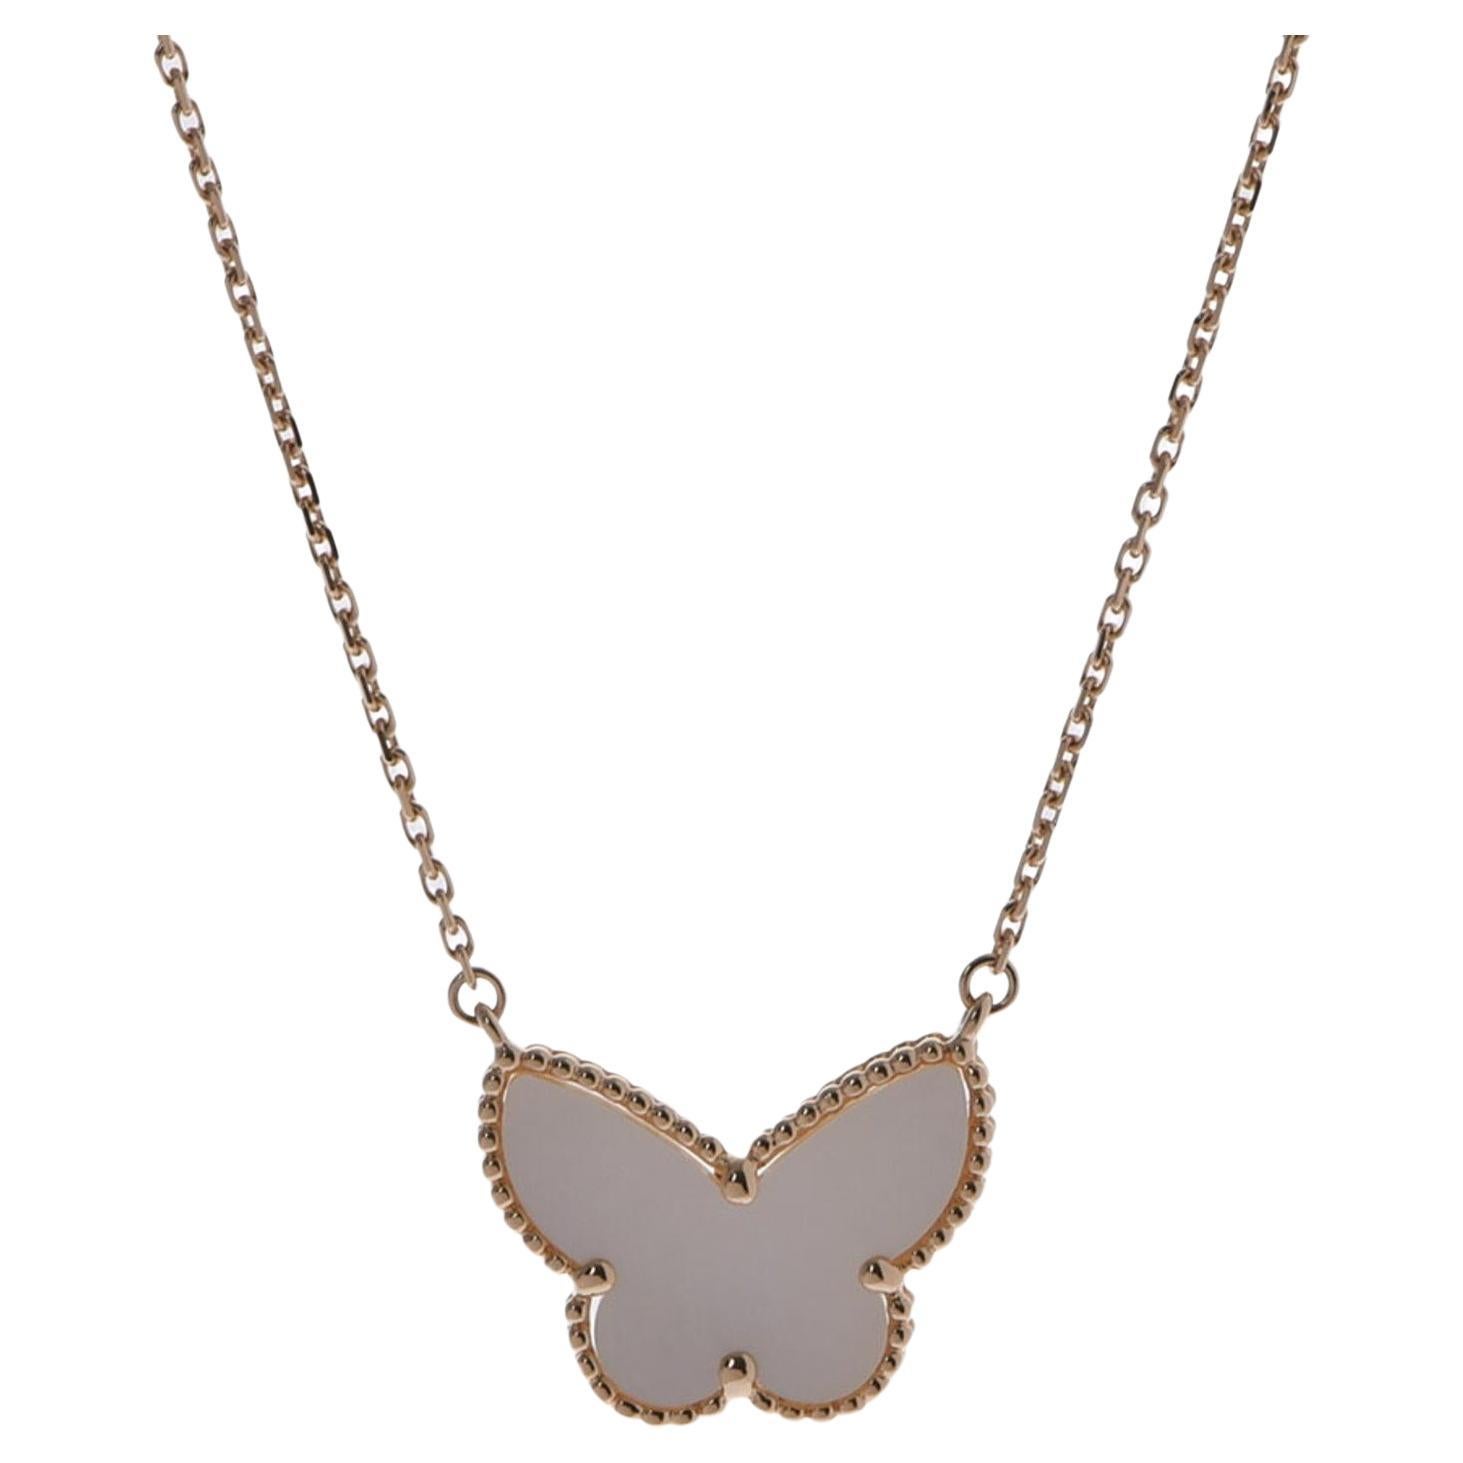 Van Cleef & Arpels Lucky Alhambra Necklace in 18K Yellow Gold